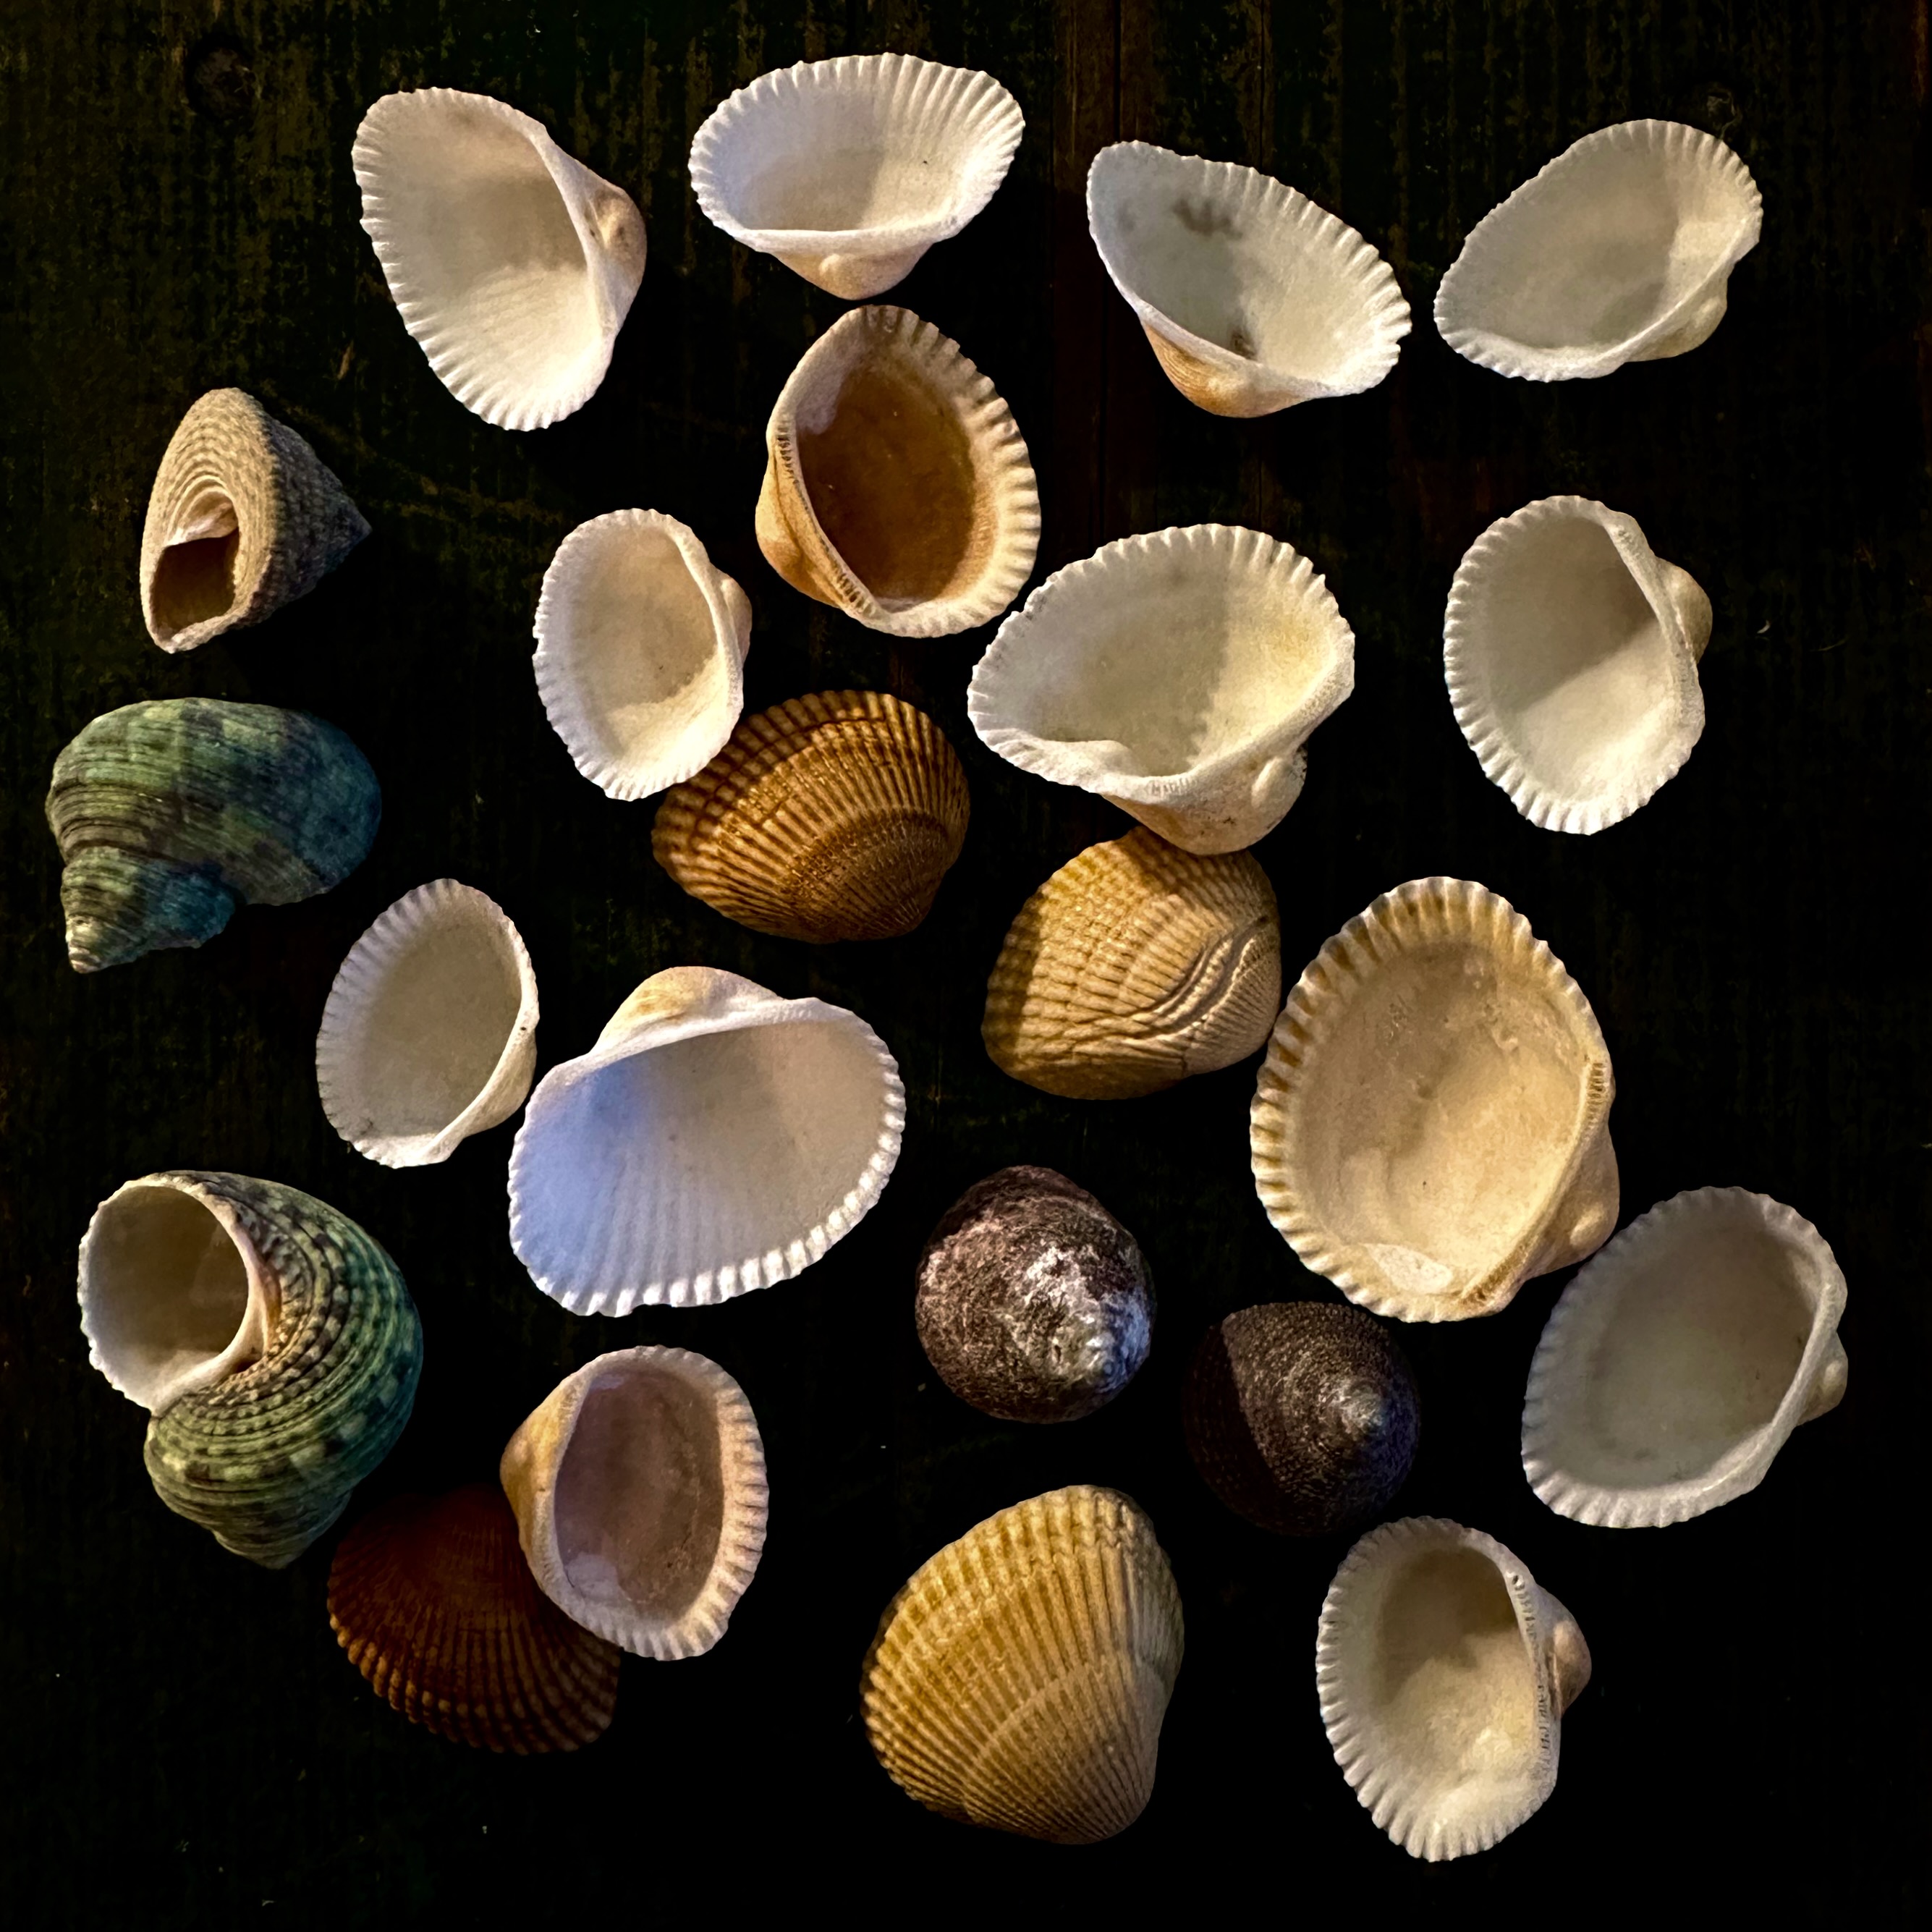 Content in a Cottage: A Collection of Small Shells I Just Purchased